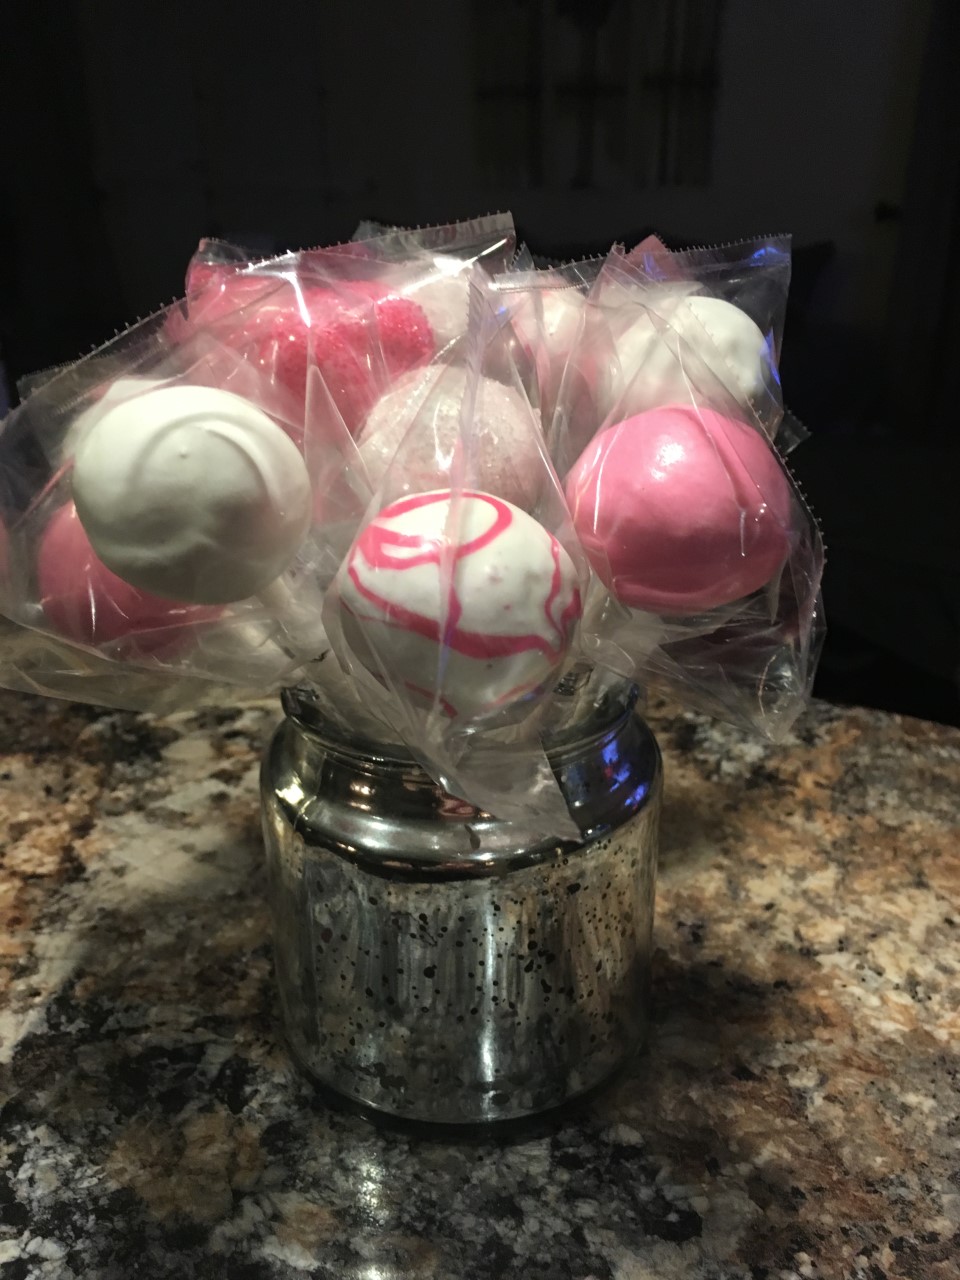 Pink and white cake pops